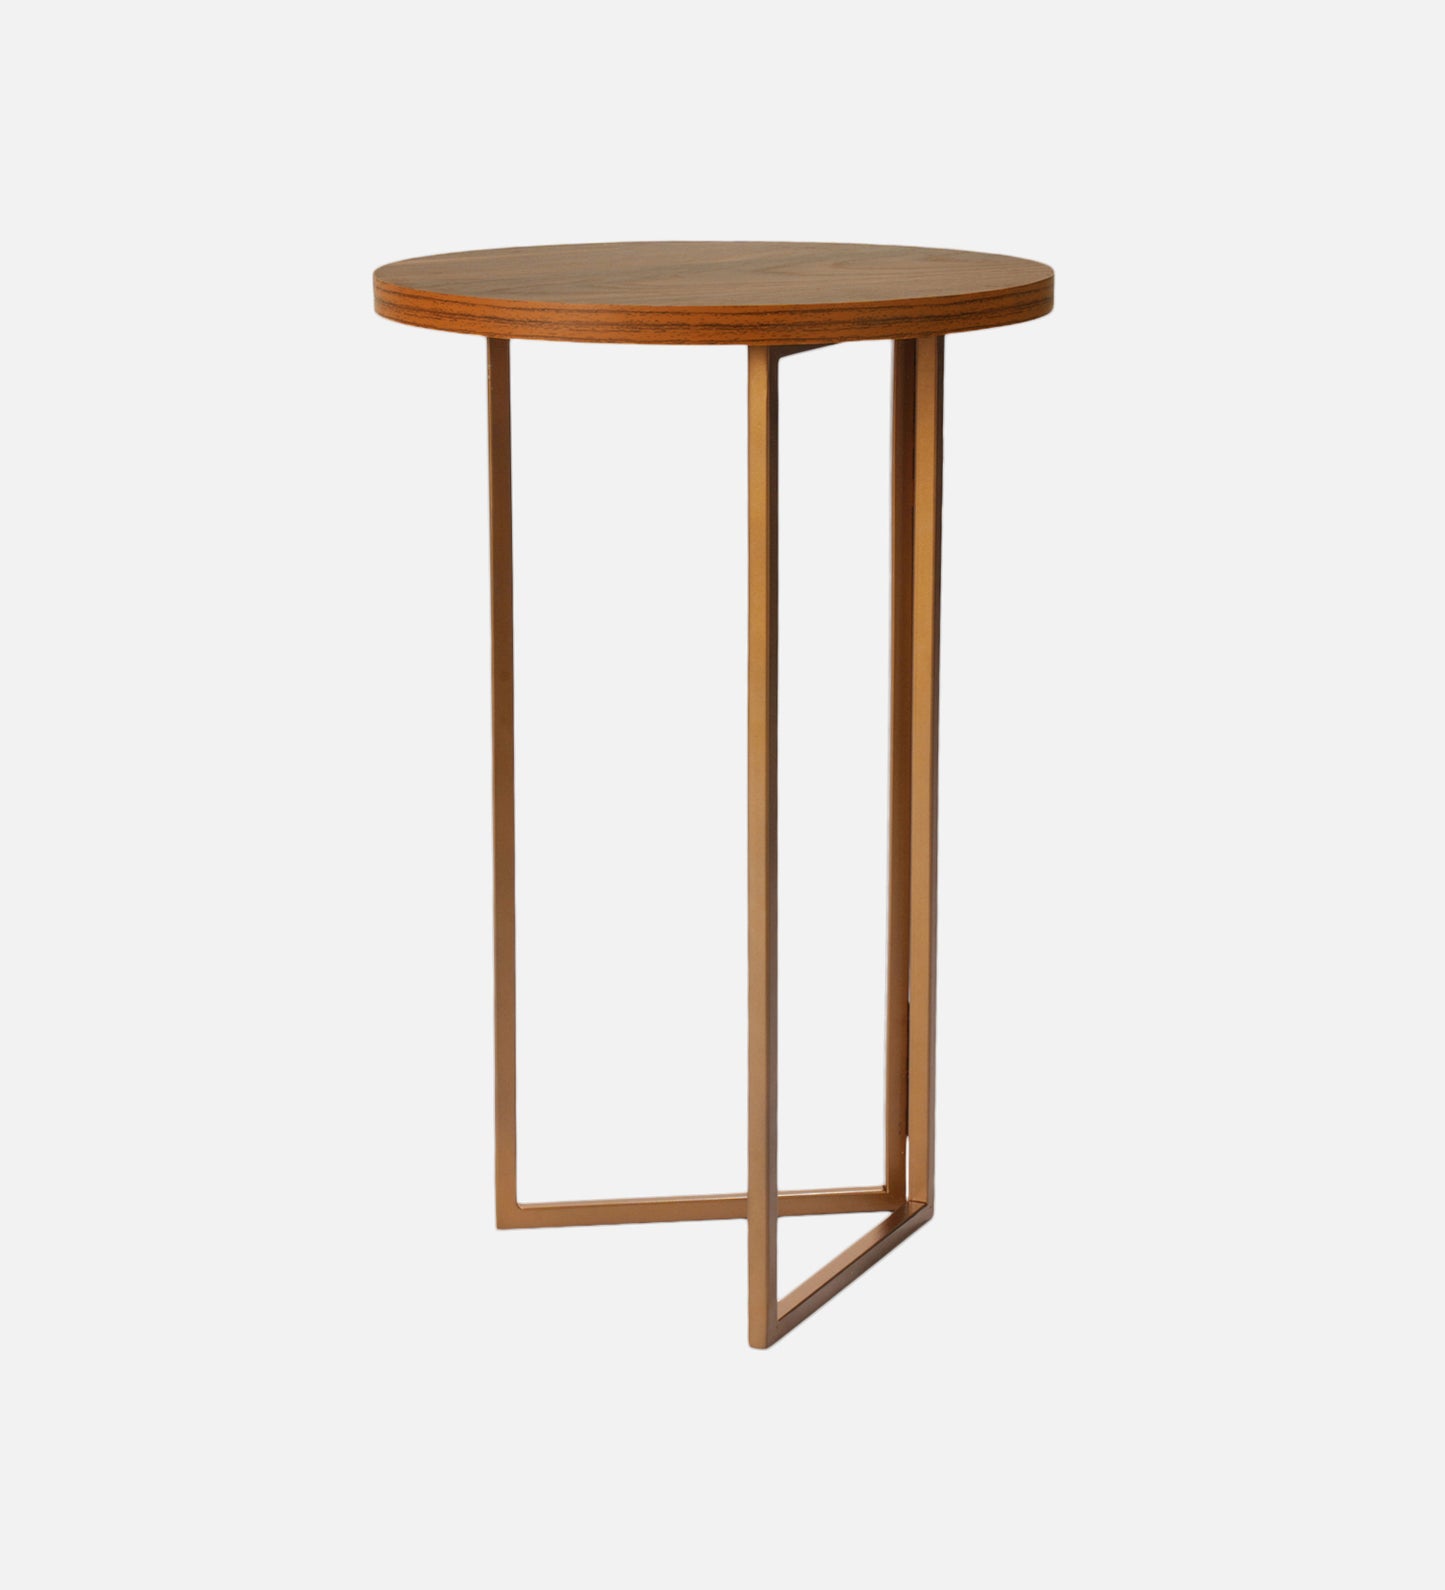 Teak Hues (Antique Gold Legs) Round Oblique Side Tables, Wooden Tables, Living Room Decor by A Tiny Mistake